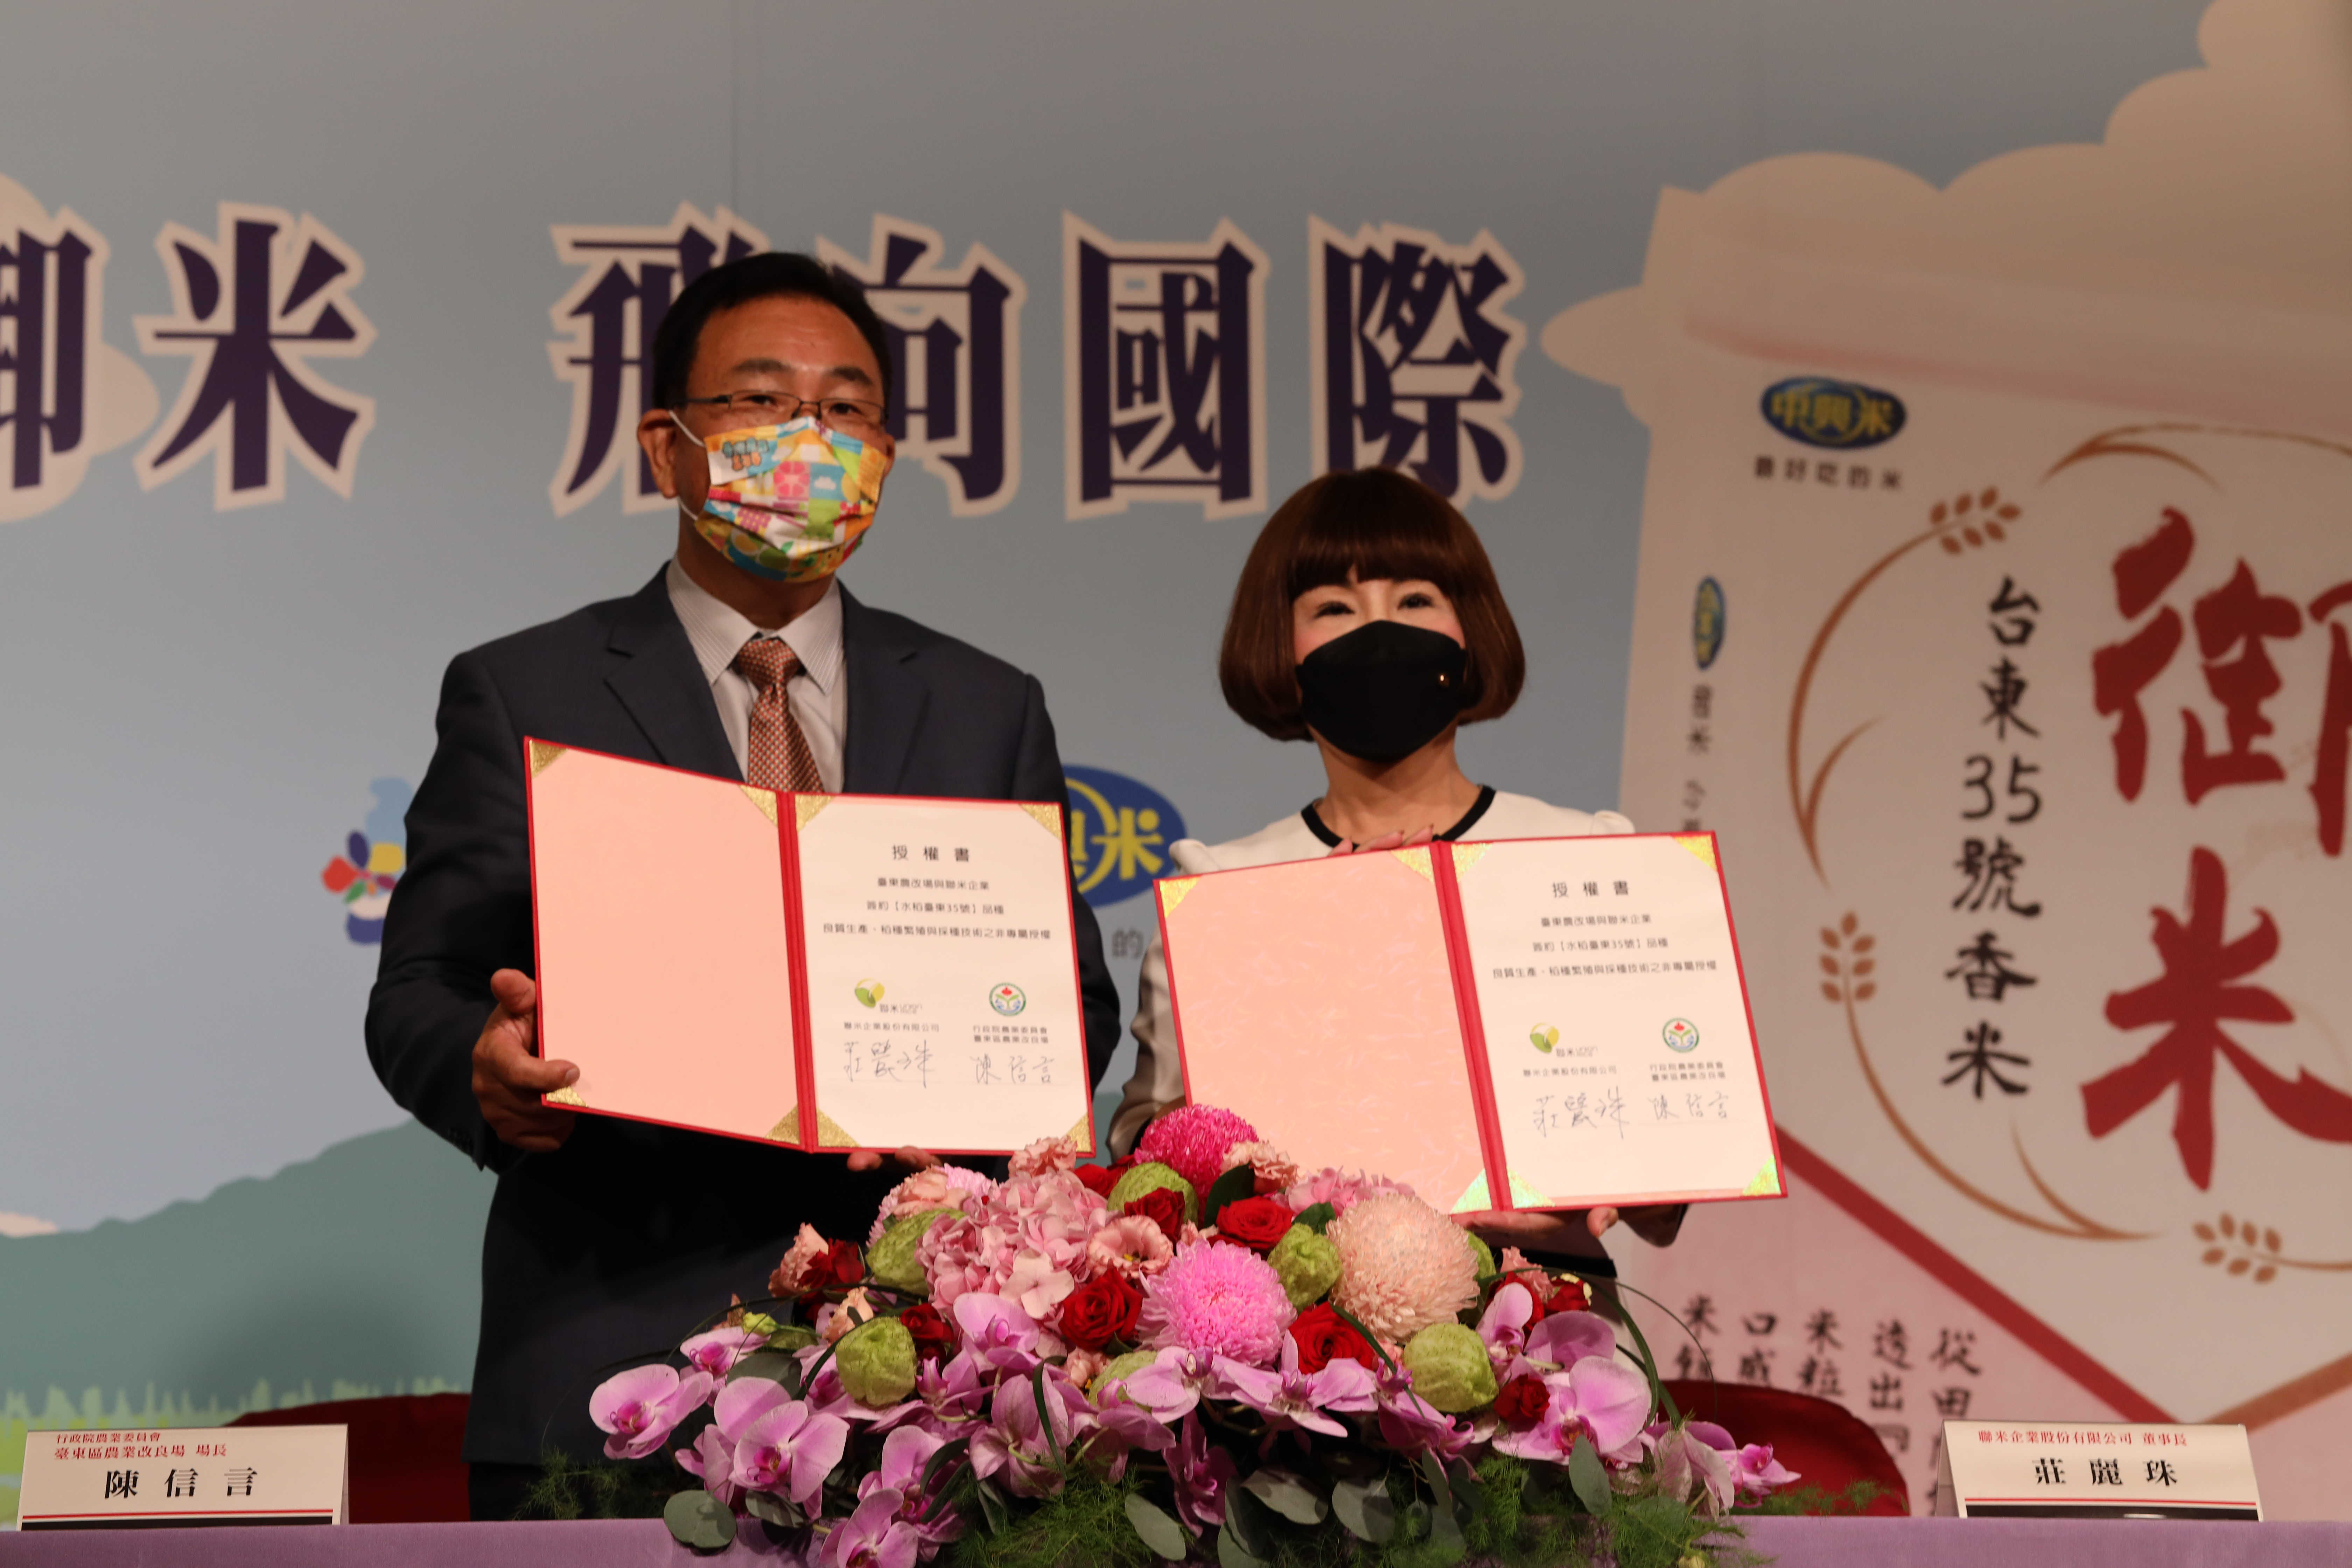 NON-EXCLUSIVE LICENSE OF RICE NEW CULTIVAR “TAITUNG 35”